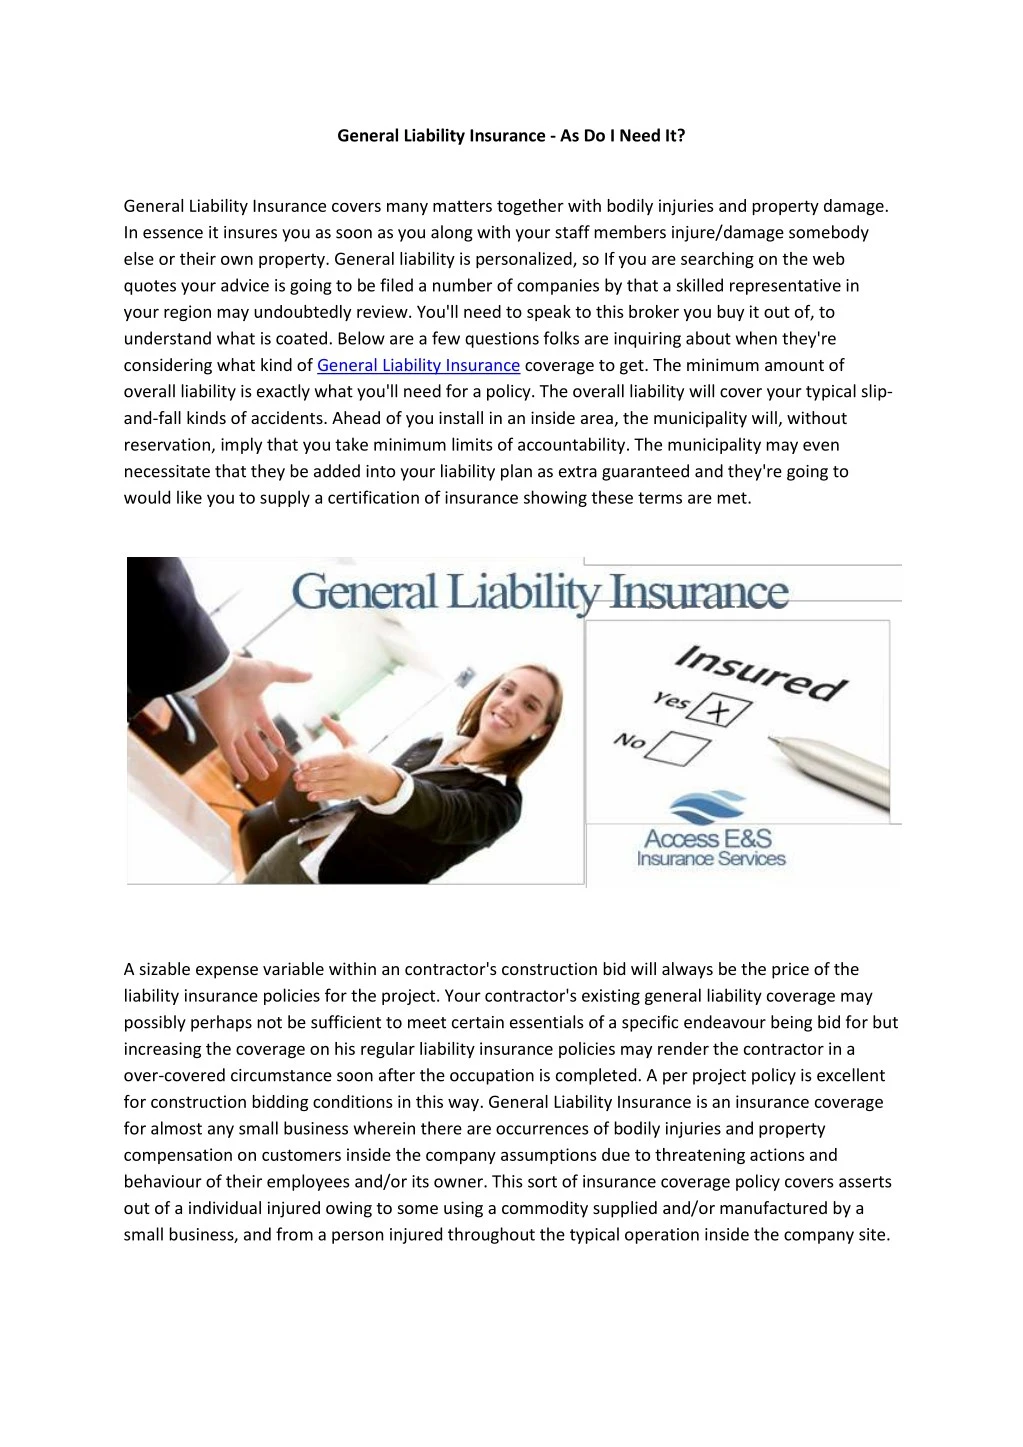 general liability insurance as do i need it n.